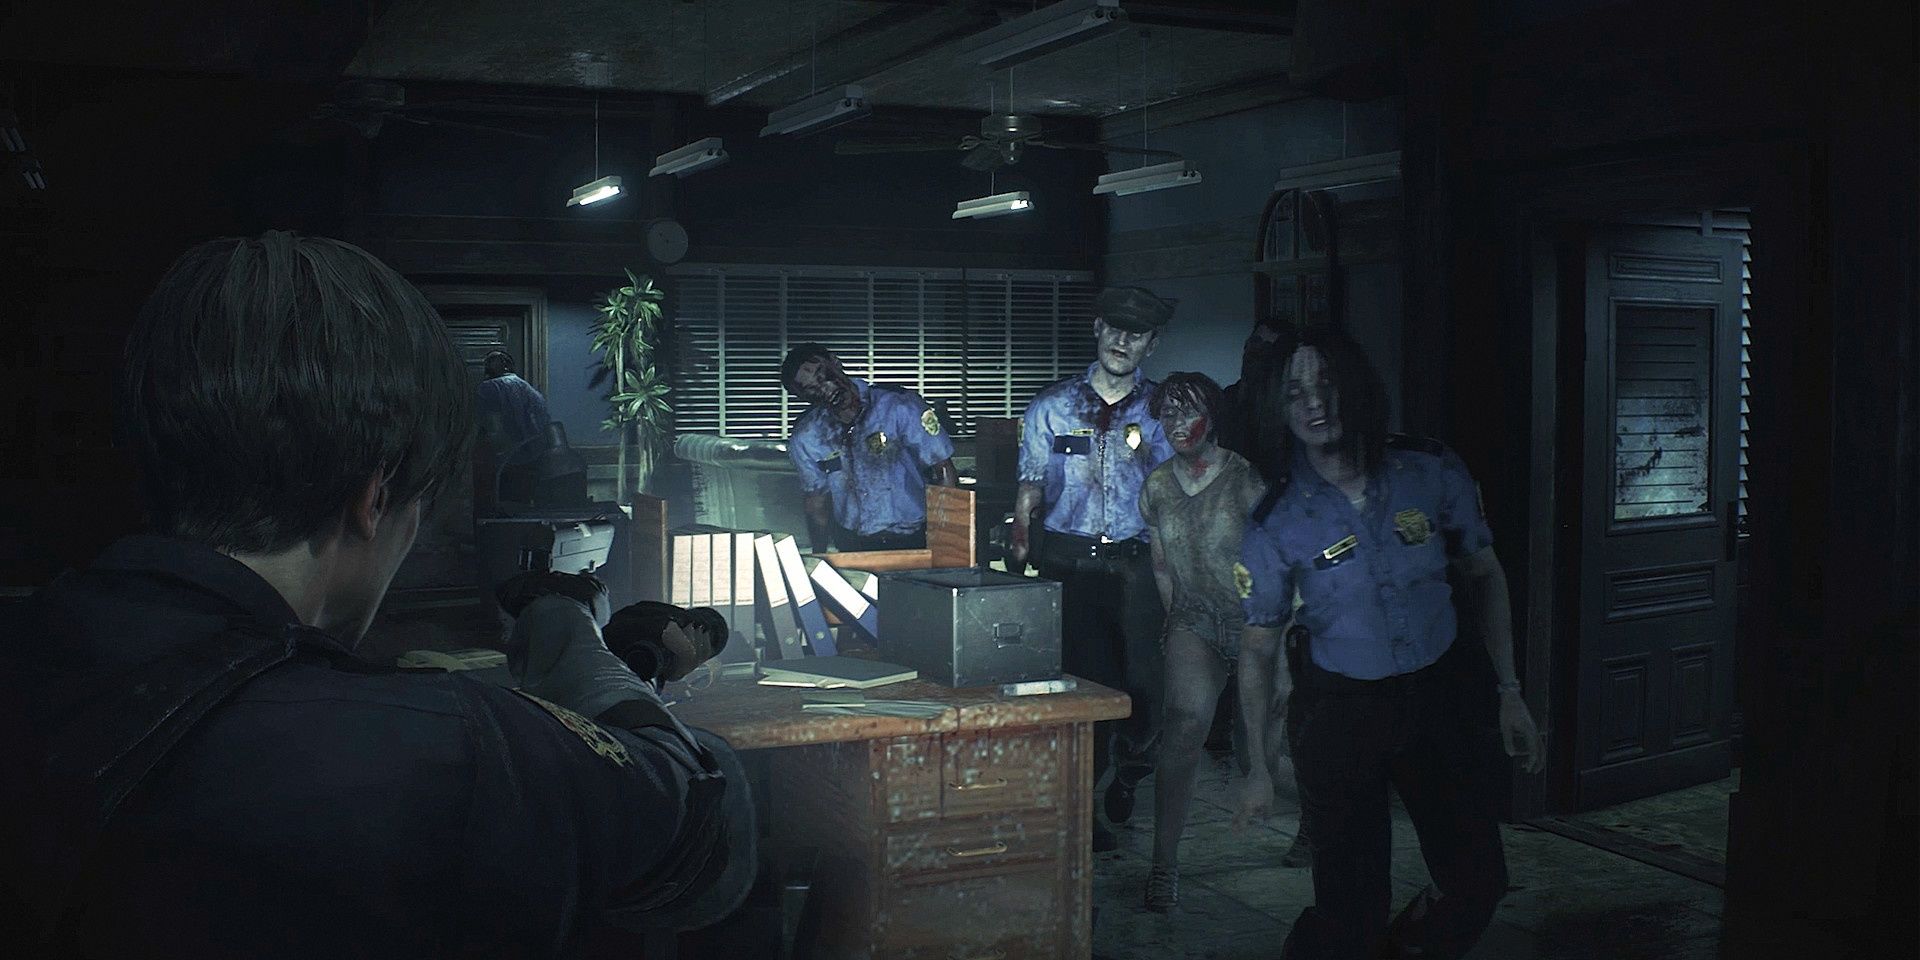 Leon aiming his gun at a group of zombies in Resident Evil 2 Remake